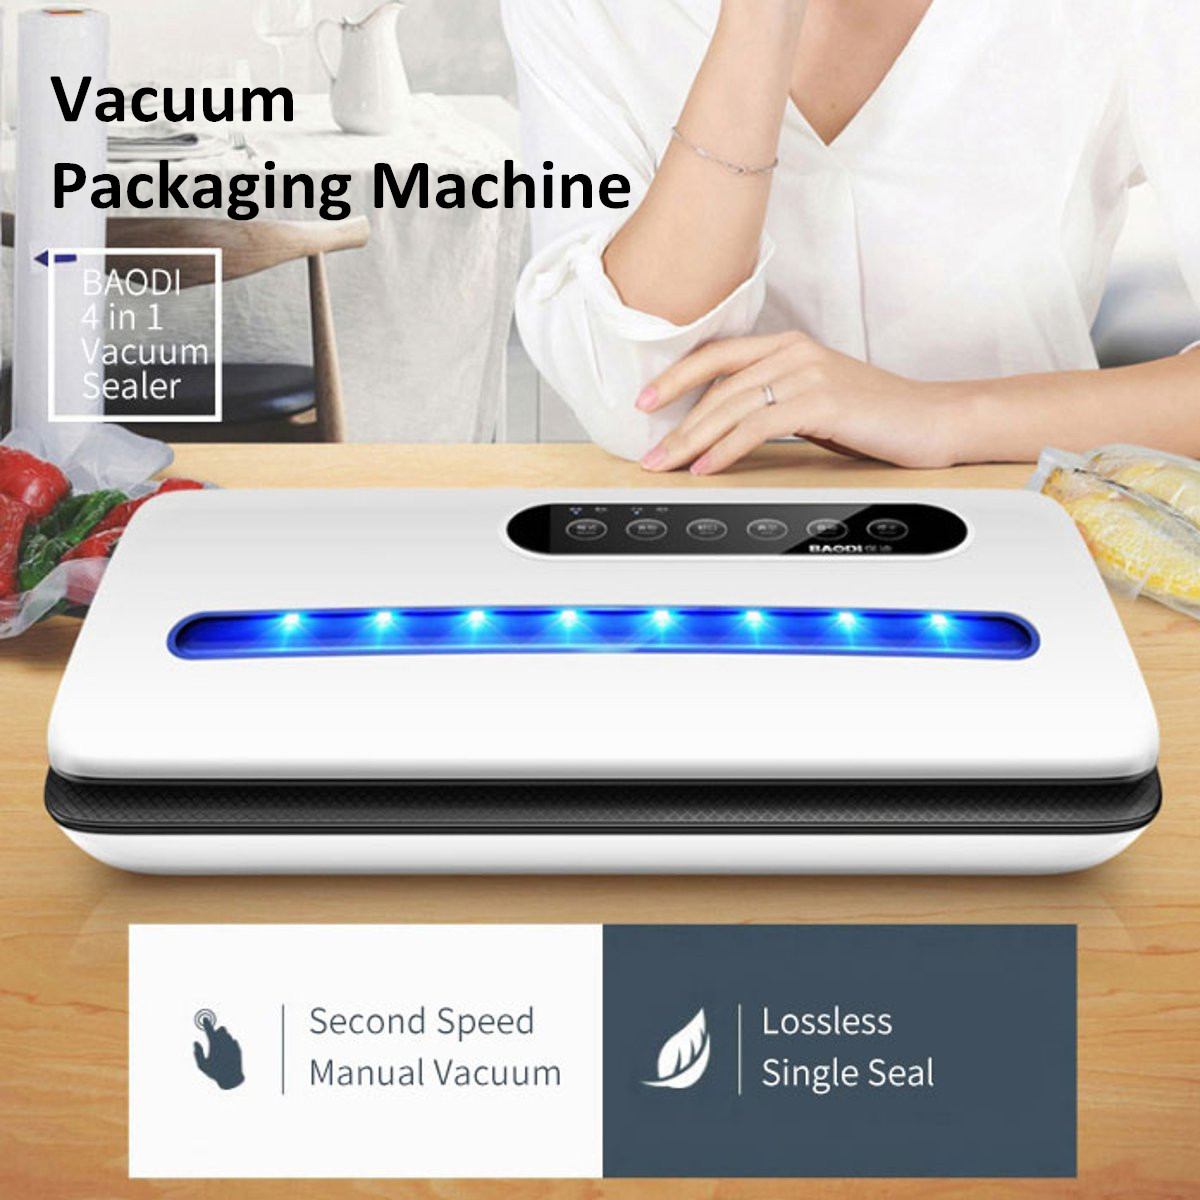 Full-automatic Electric Vacuum Sealing Machine Dry and Wet Vacuum Packaging Machine Vacuum Commercial and Household Food Sealers 220-240V 10